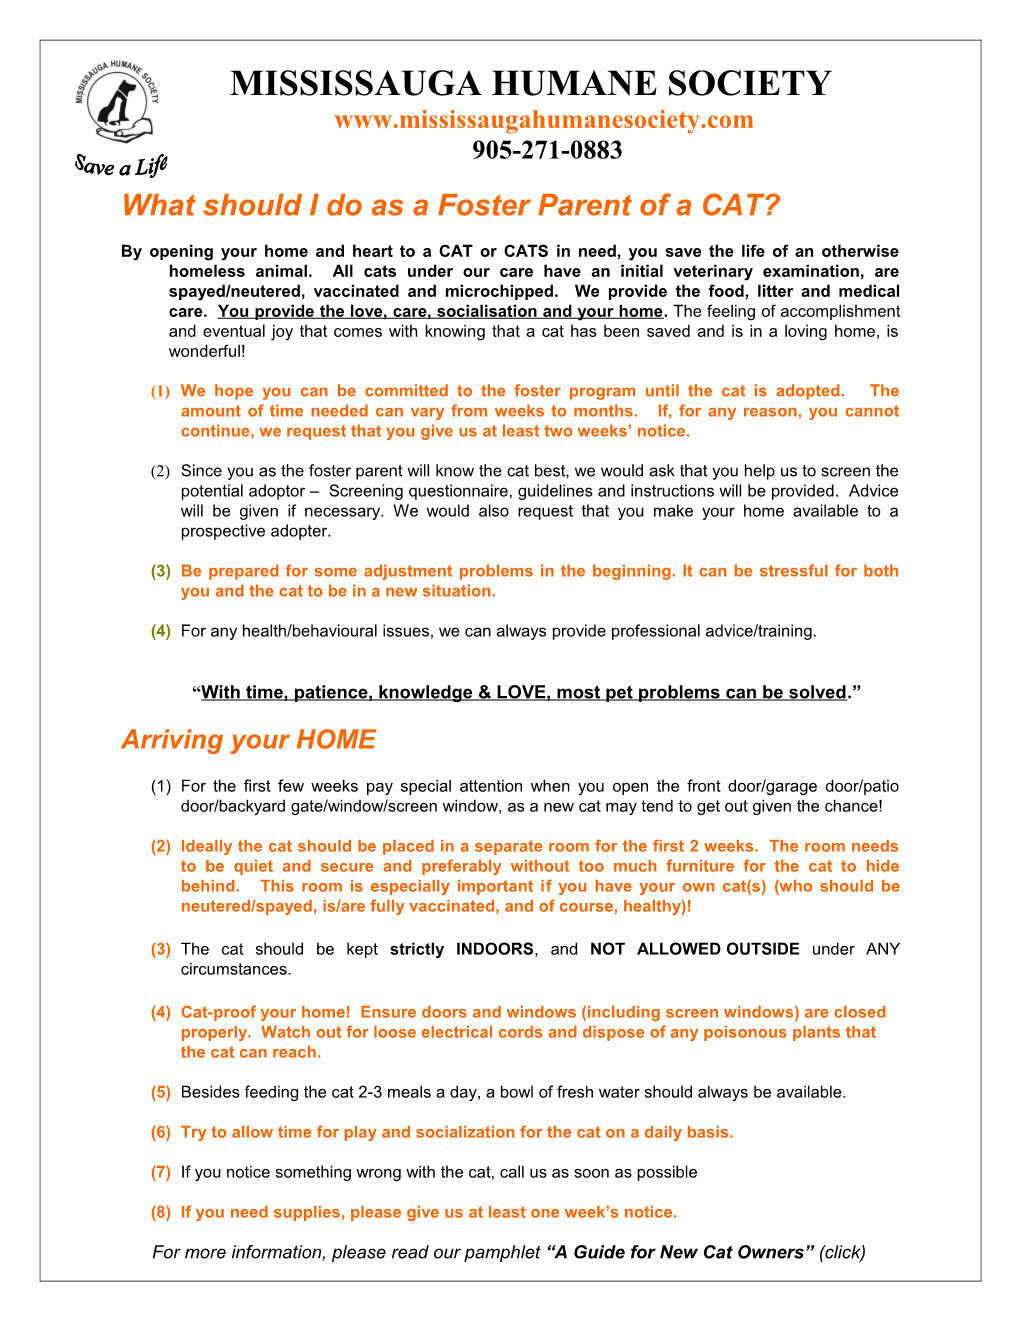 What Should I Do As a Foster Parent of a CAT?